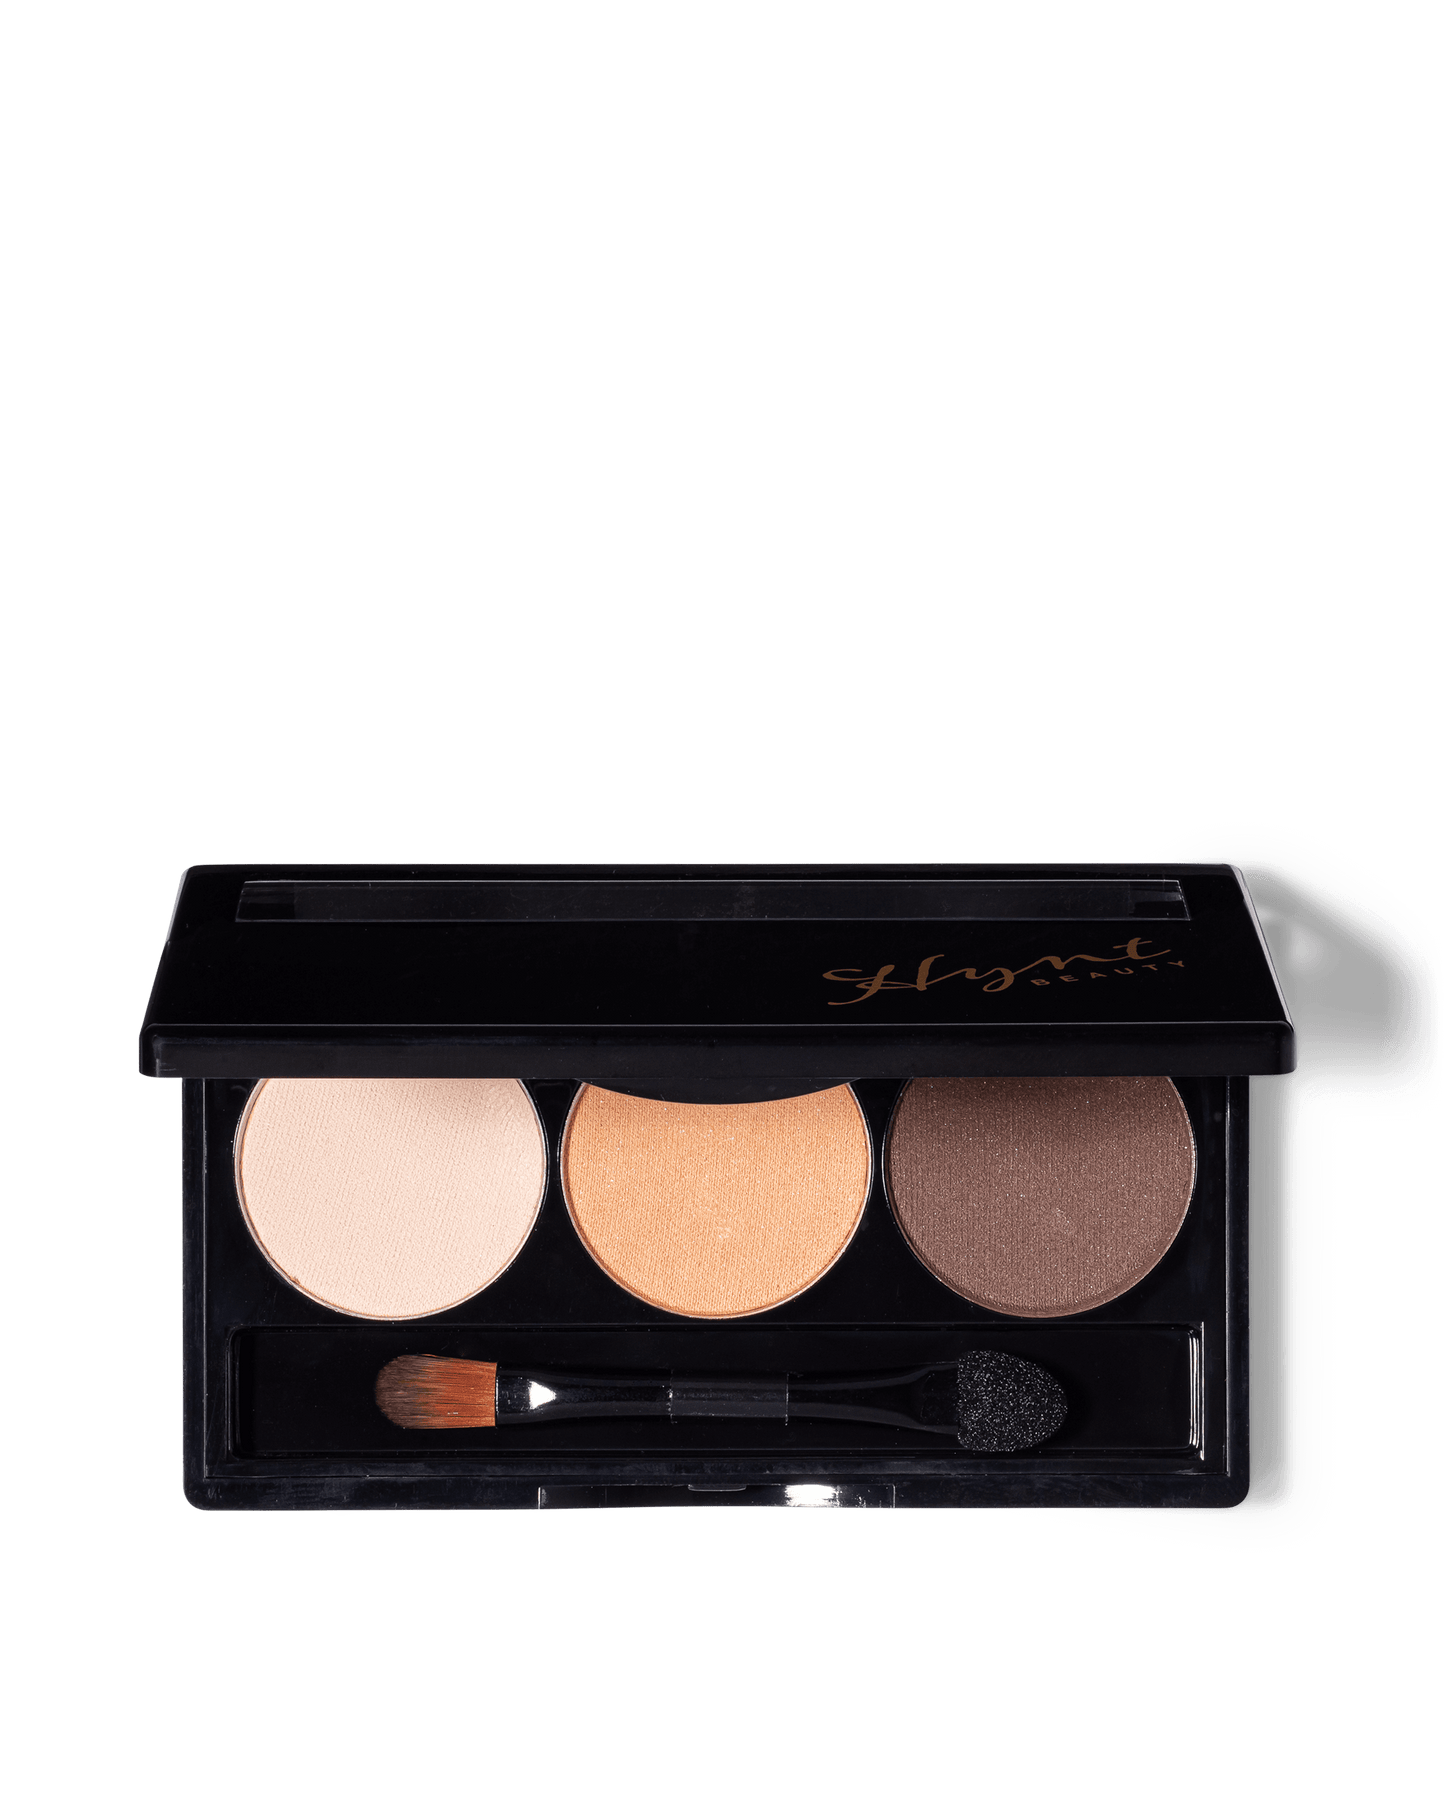 ${ title} at $39 only from Hynt Beauty